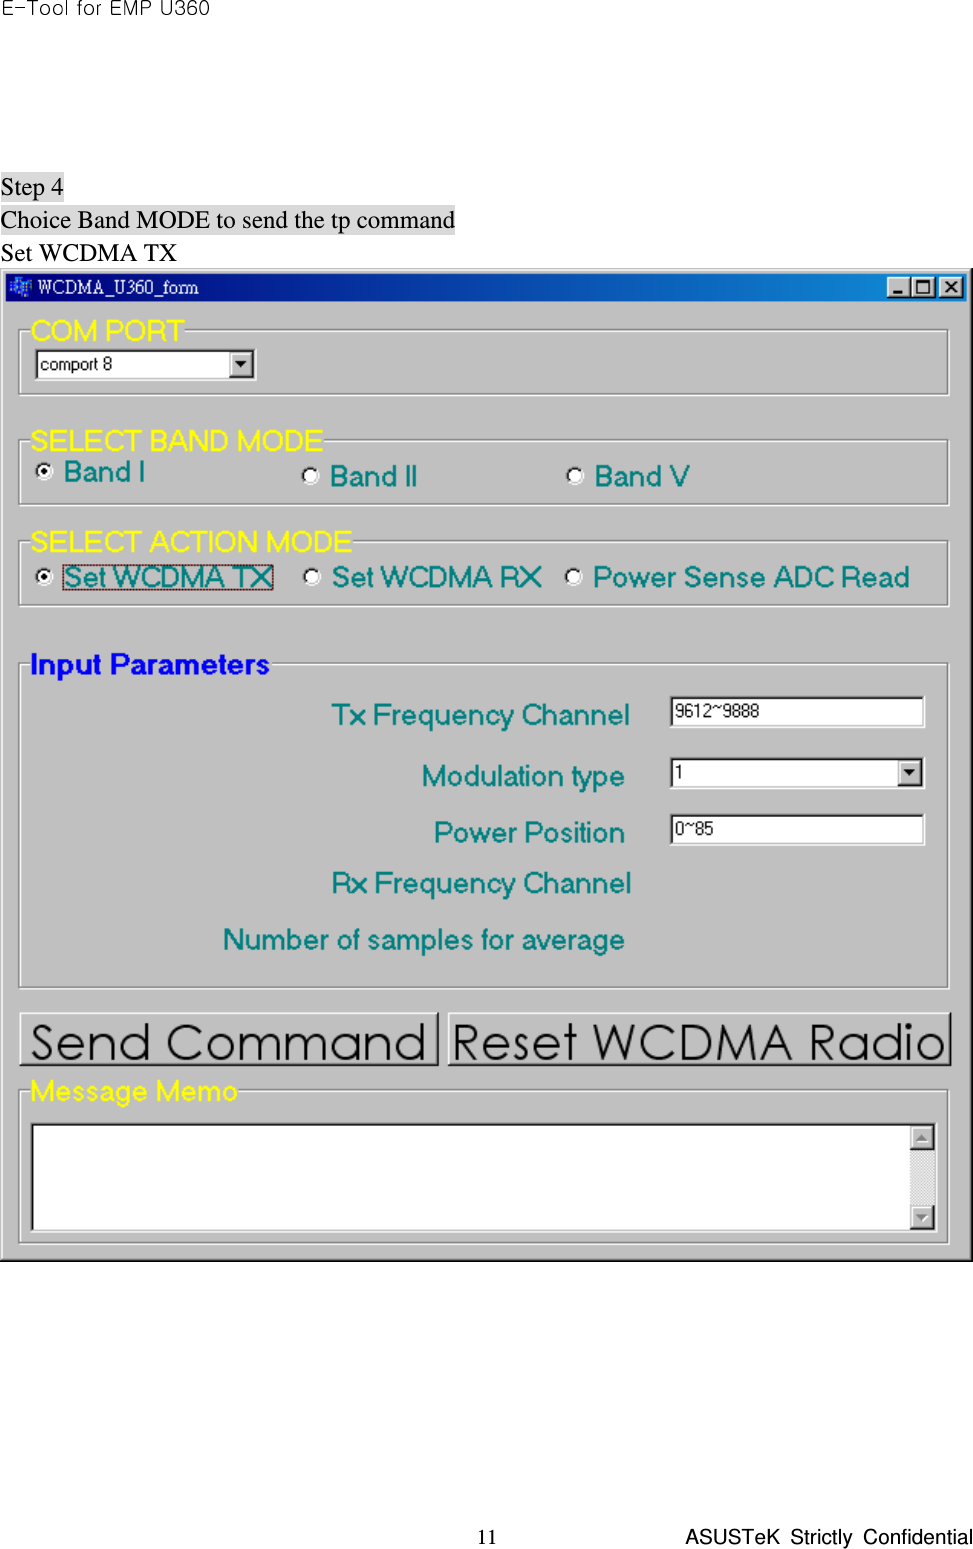  ASUSTeK  Strictly  Confidential 11    Step 4 Choice Band MODE to send the tp command Set WCDMA TX         